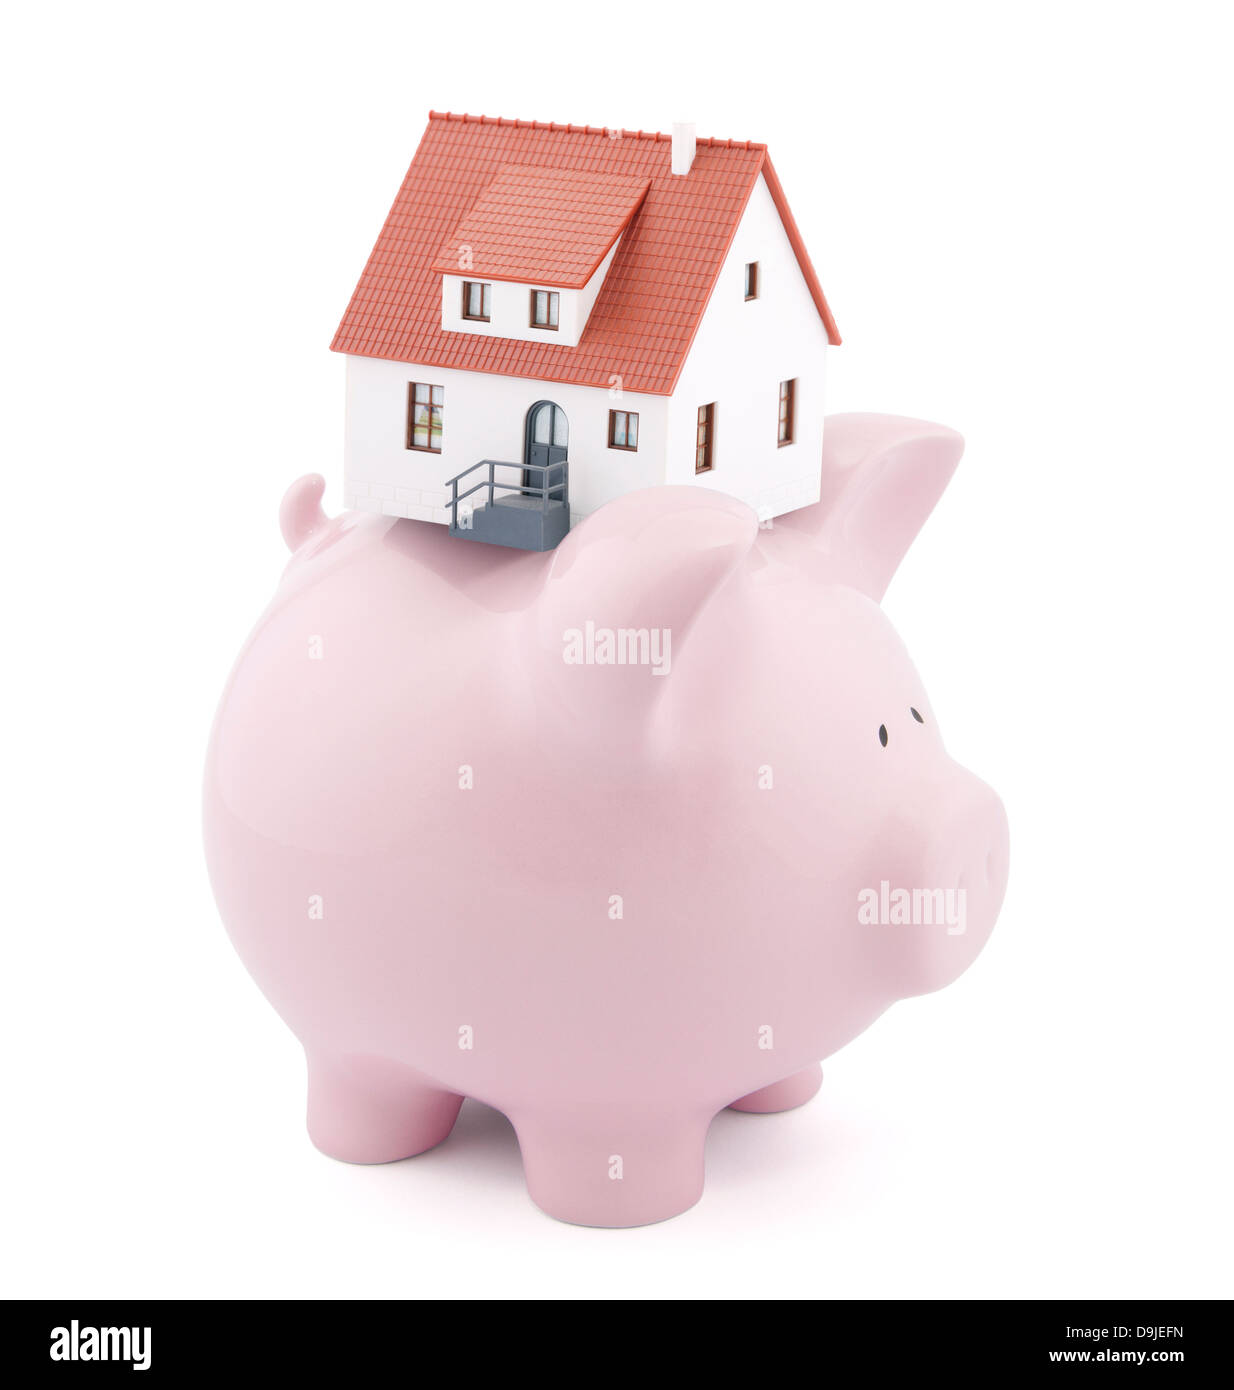 Piggy bank with small model house Stock Photo